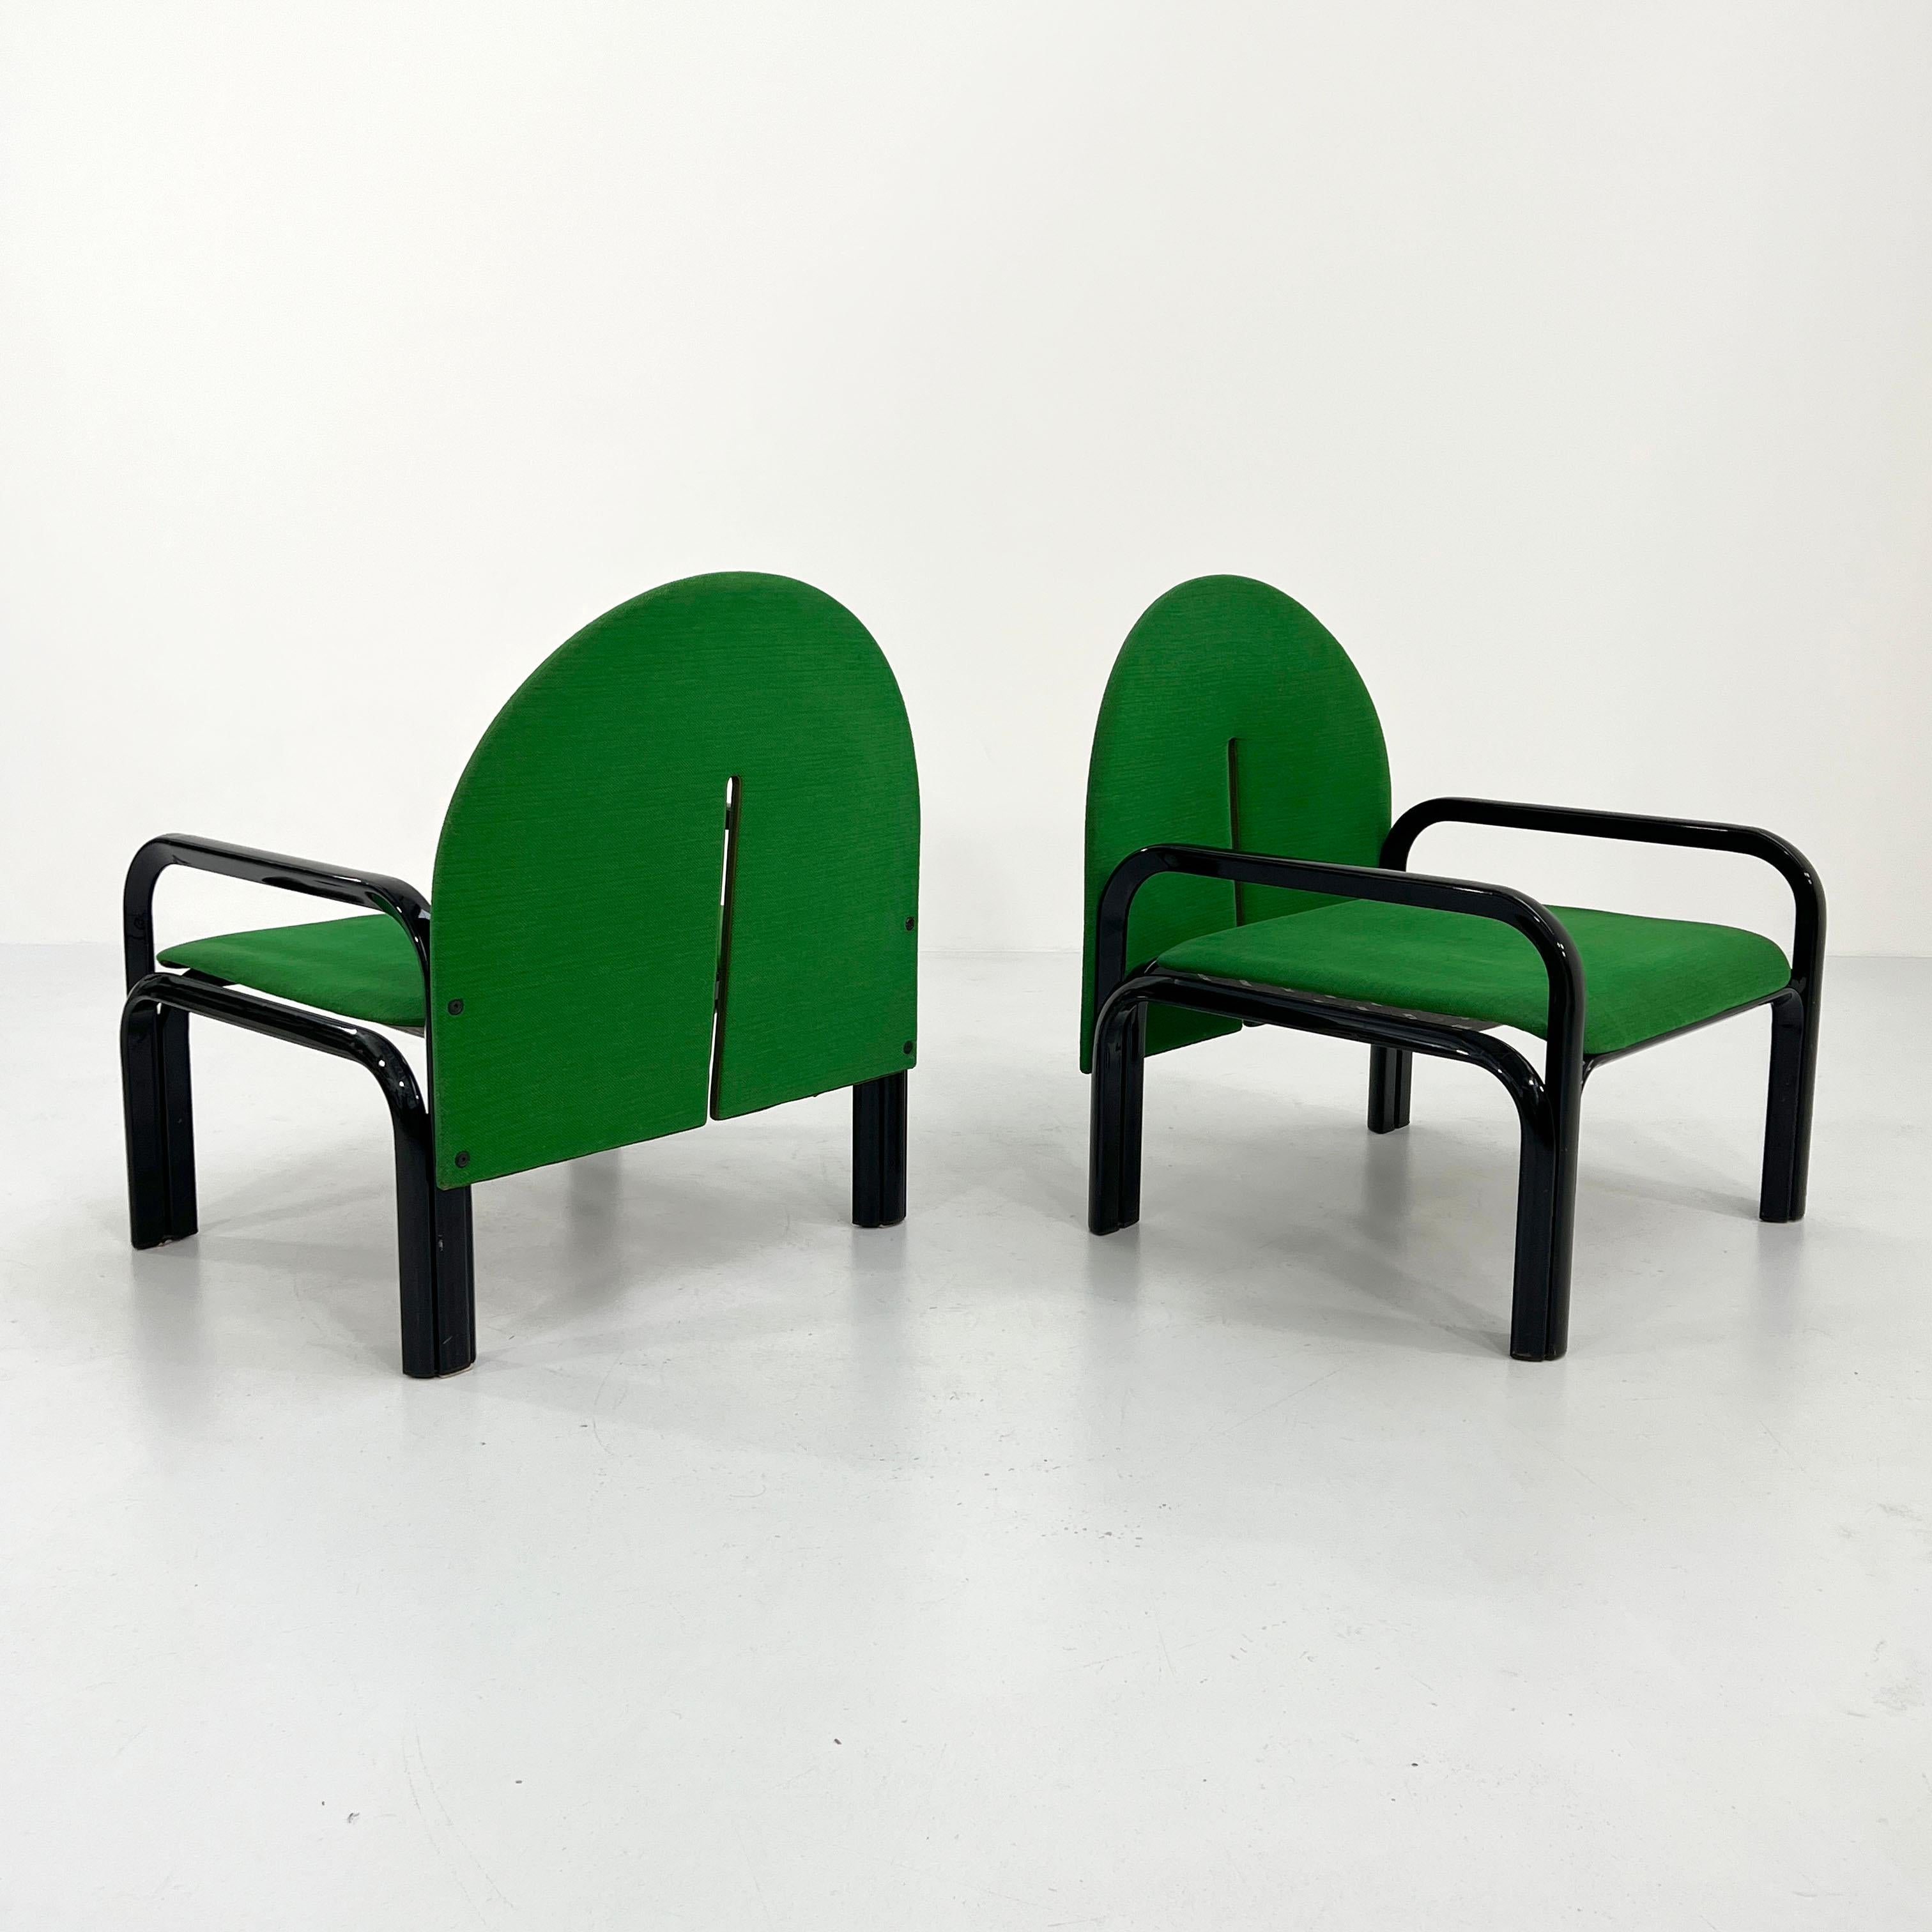 Designer - Gae Aulenti
Producer - Knoll
Model - 54 L Armchairs
Design Period - Seventies 
Measurements - Width 70 cm x Depth 61 cm x Height 77 cm x Seat Height 35 cm
Materials - Fabric, Leather, Metal
Color - Green, Black
Condition - Good